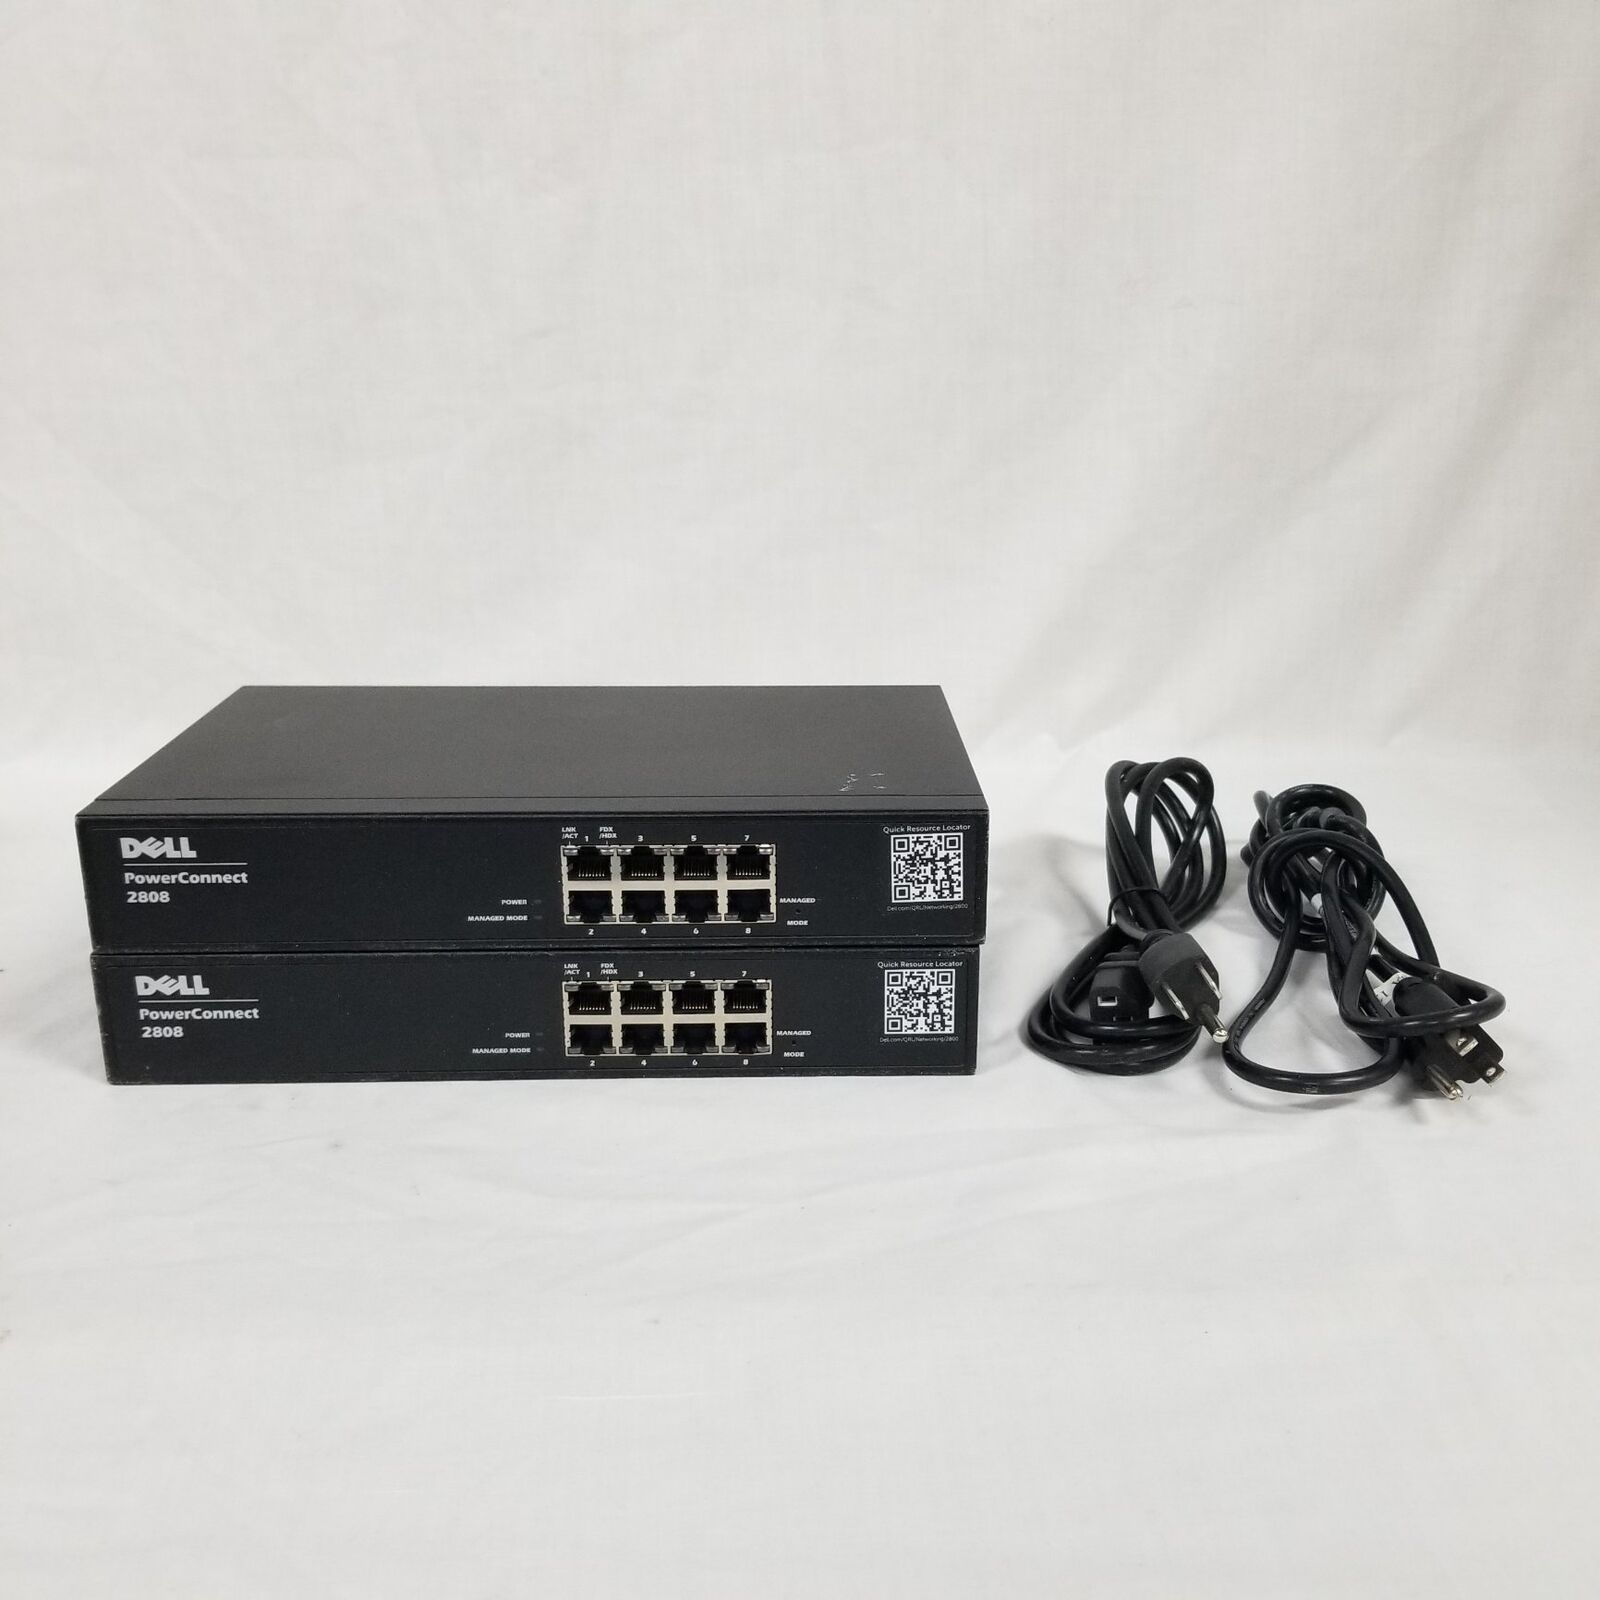 Dell PowerConnect 2808 8-Port Gigabit Ethernet Network Switches (2) POWER-TESTED